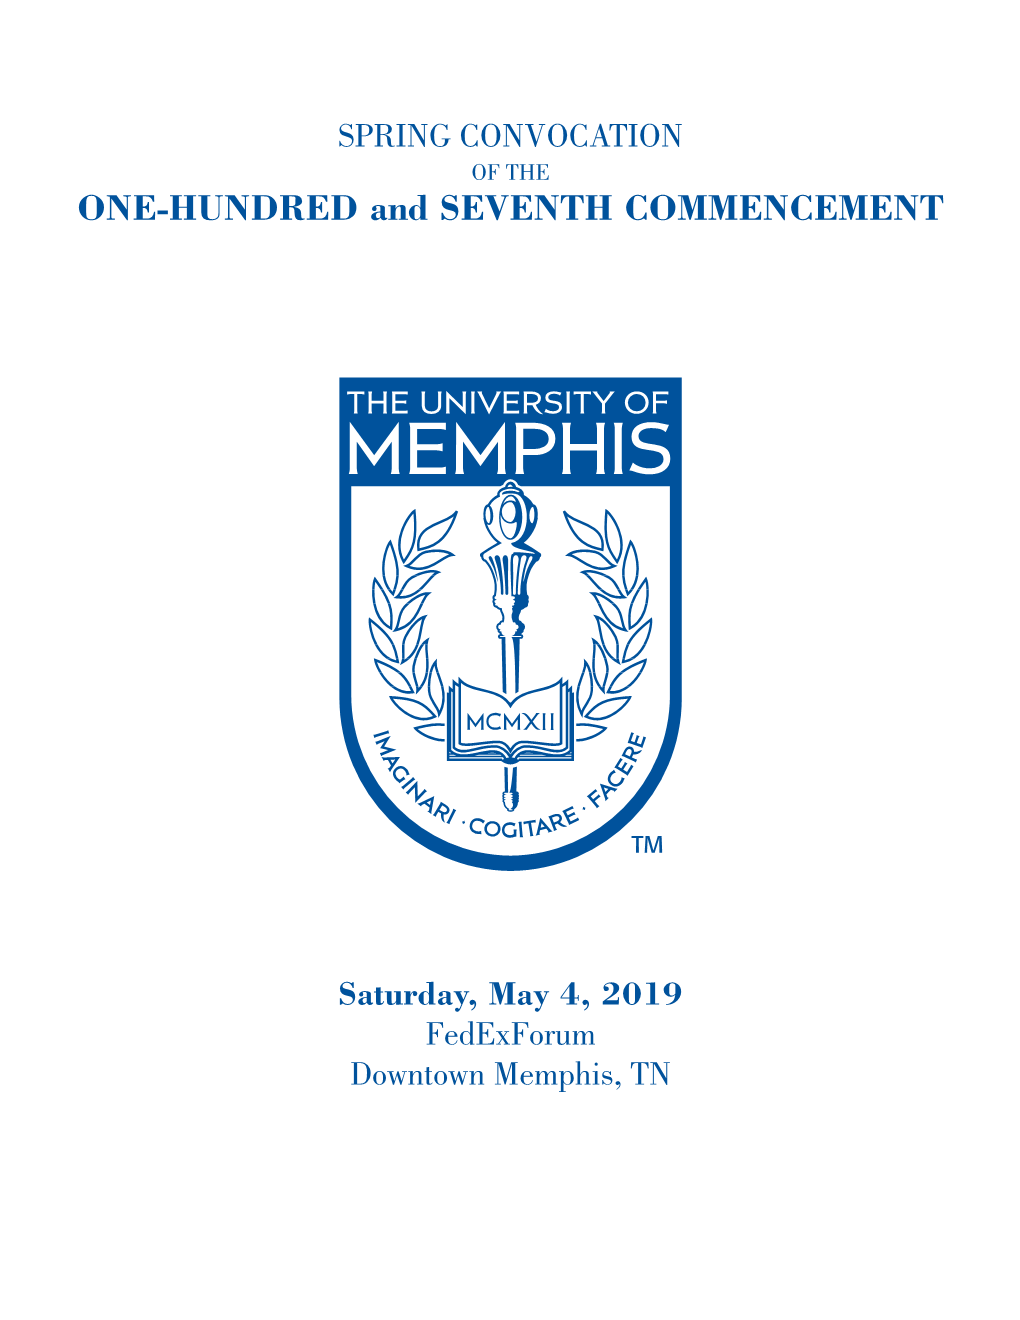 ONE-HUNDRED and SEVENTH COMMENCEMENT